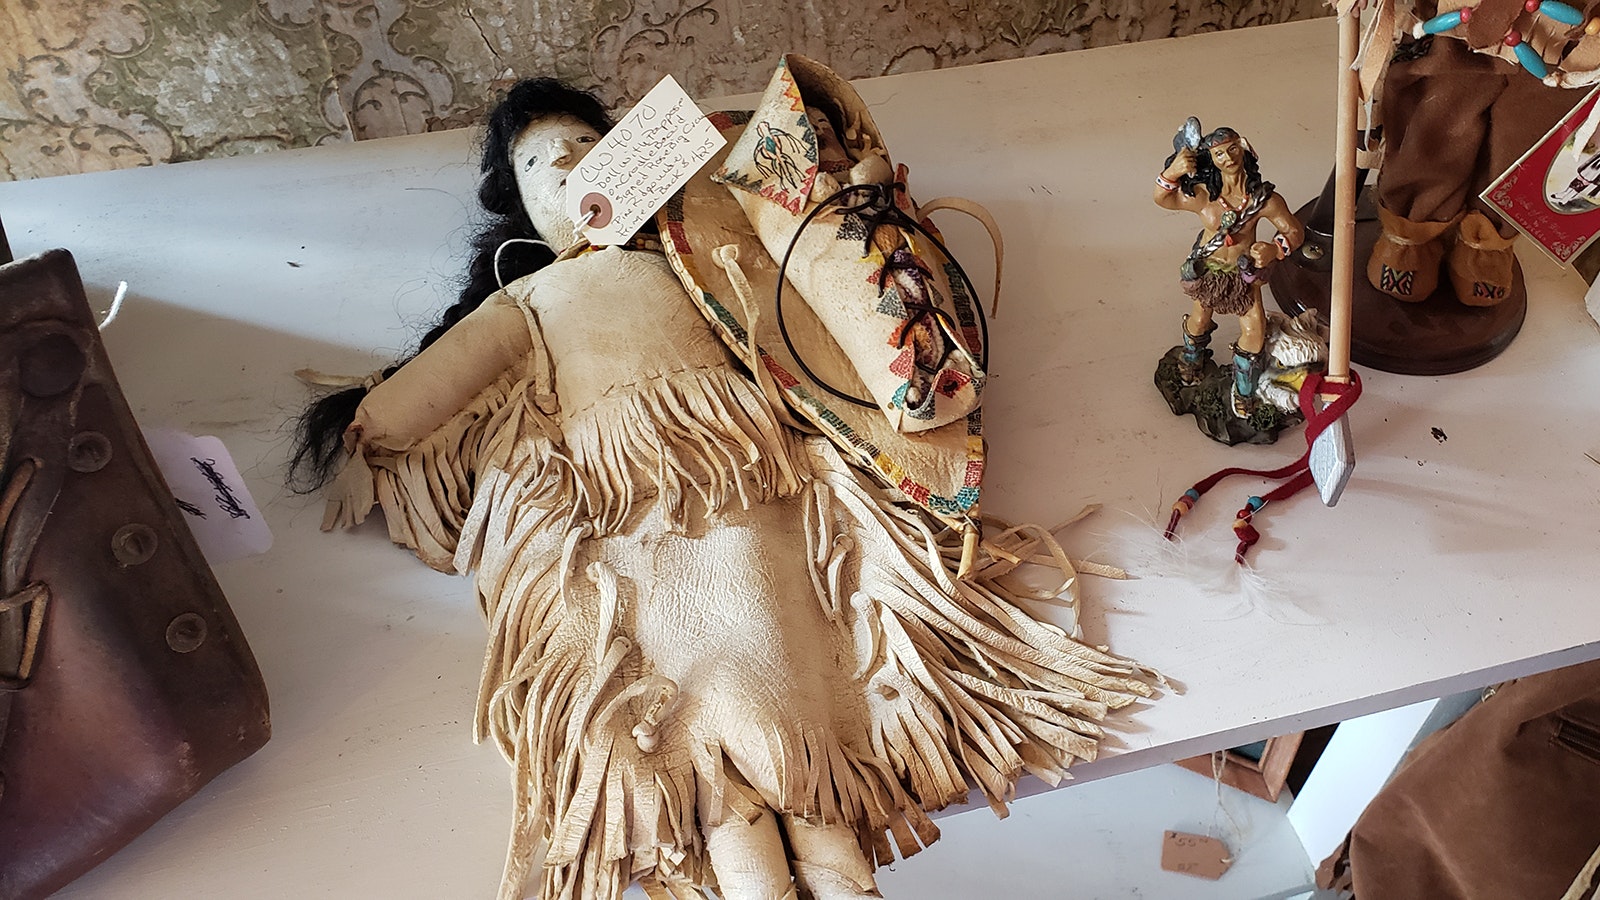 A doll on cradle board signed for sale in the Aladdin General Store.